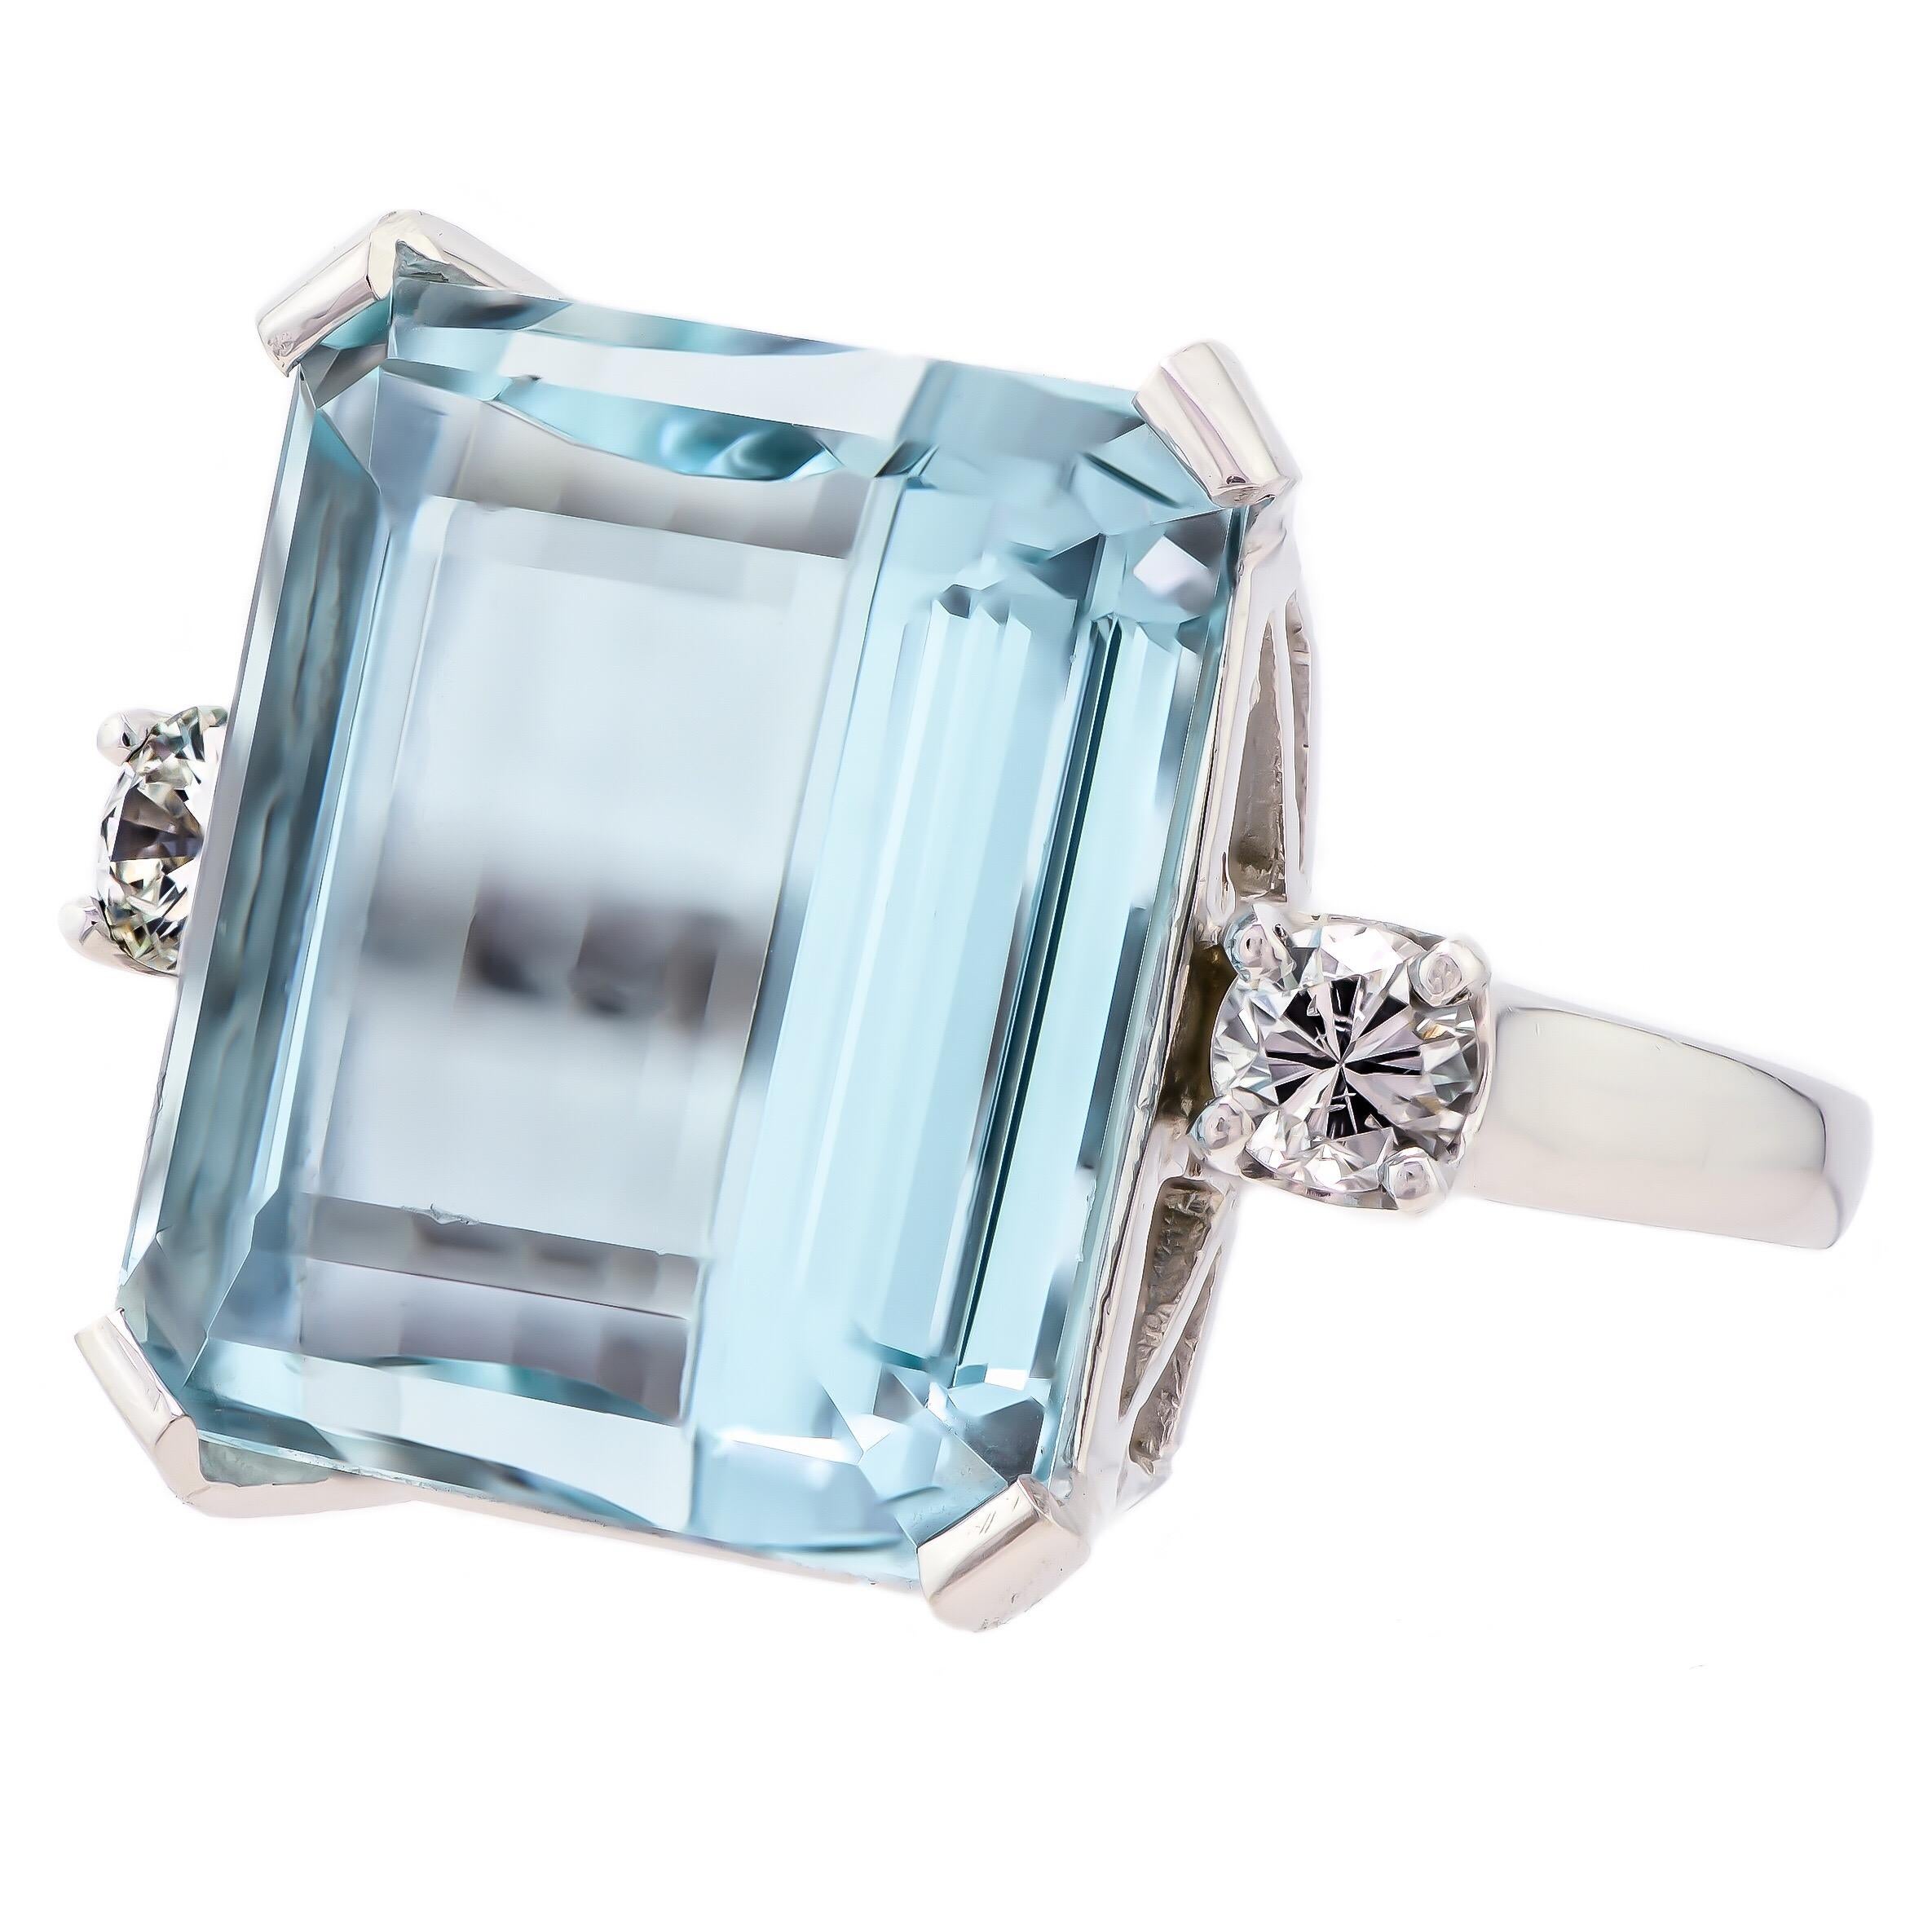 This mid-century cocktail ring is positively exquisite set with one step emerald cut medium-light blue natural aquamarine with the slightest gray/green undertones weighing approximately 18.55 carats is nestled between a total of two (one on each